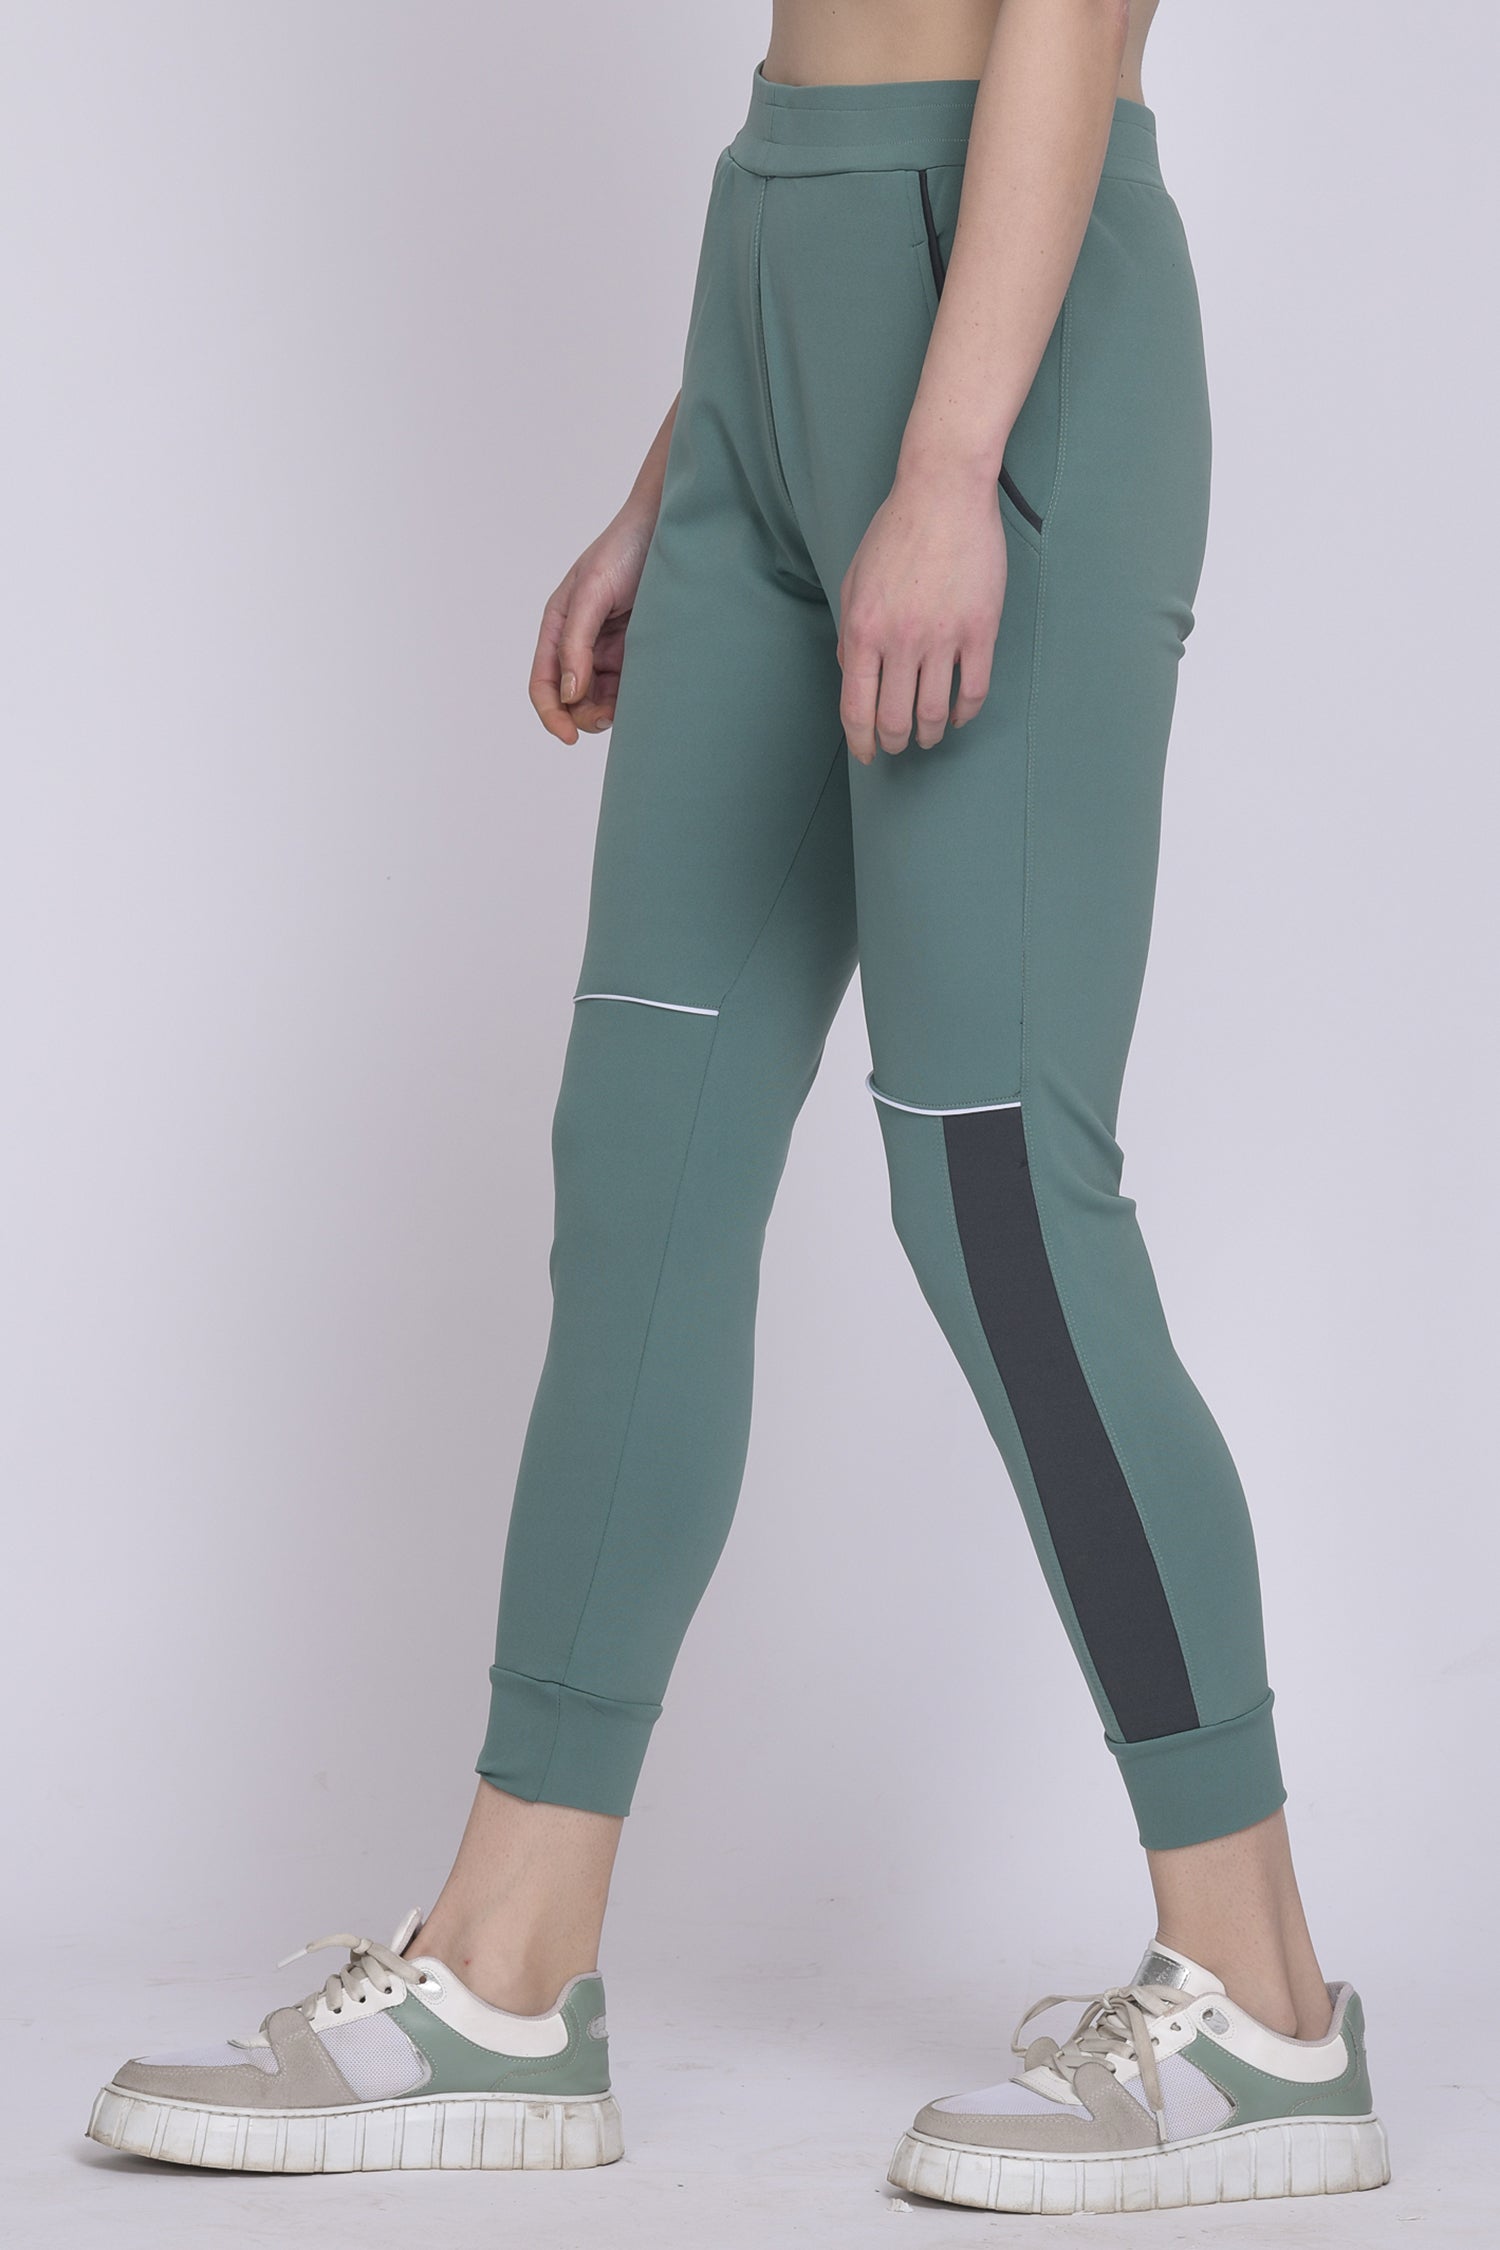 WOMENS TRACK PANTS COMBO PACK OF 03,LADIES TRACK PANTS COMBO PACK OF 03